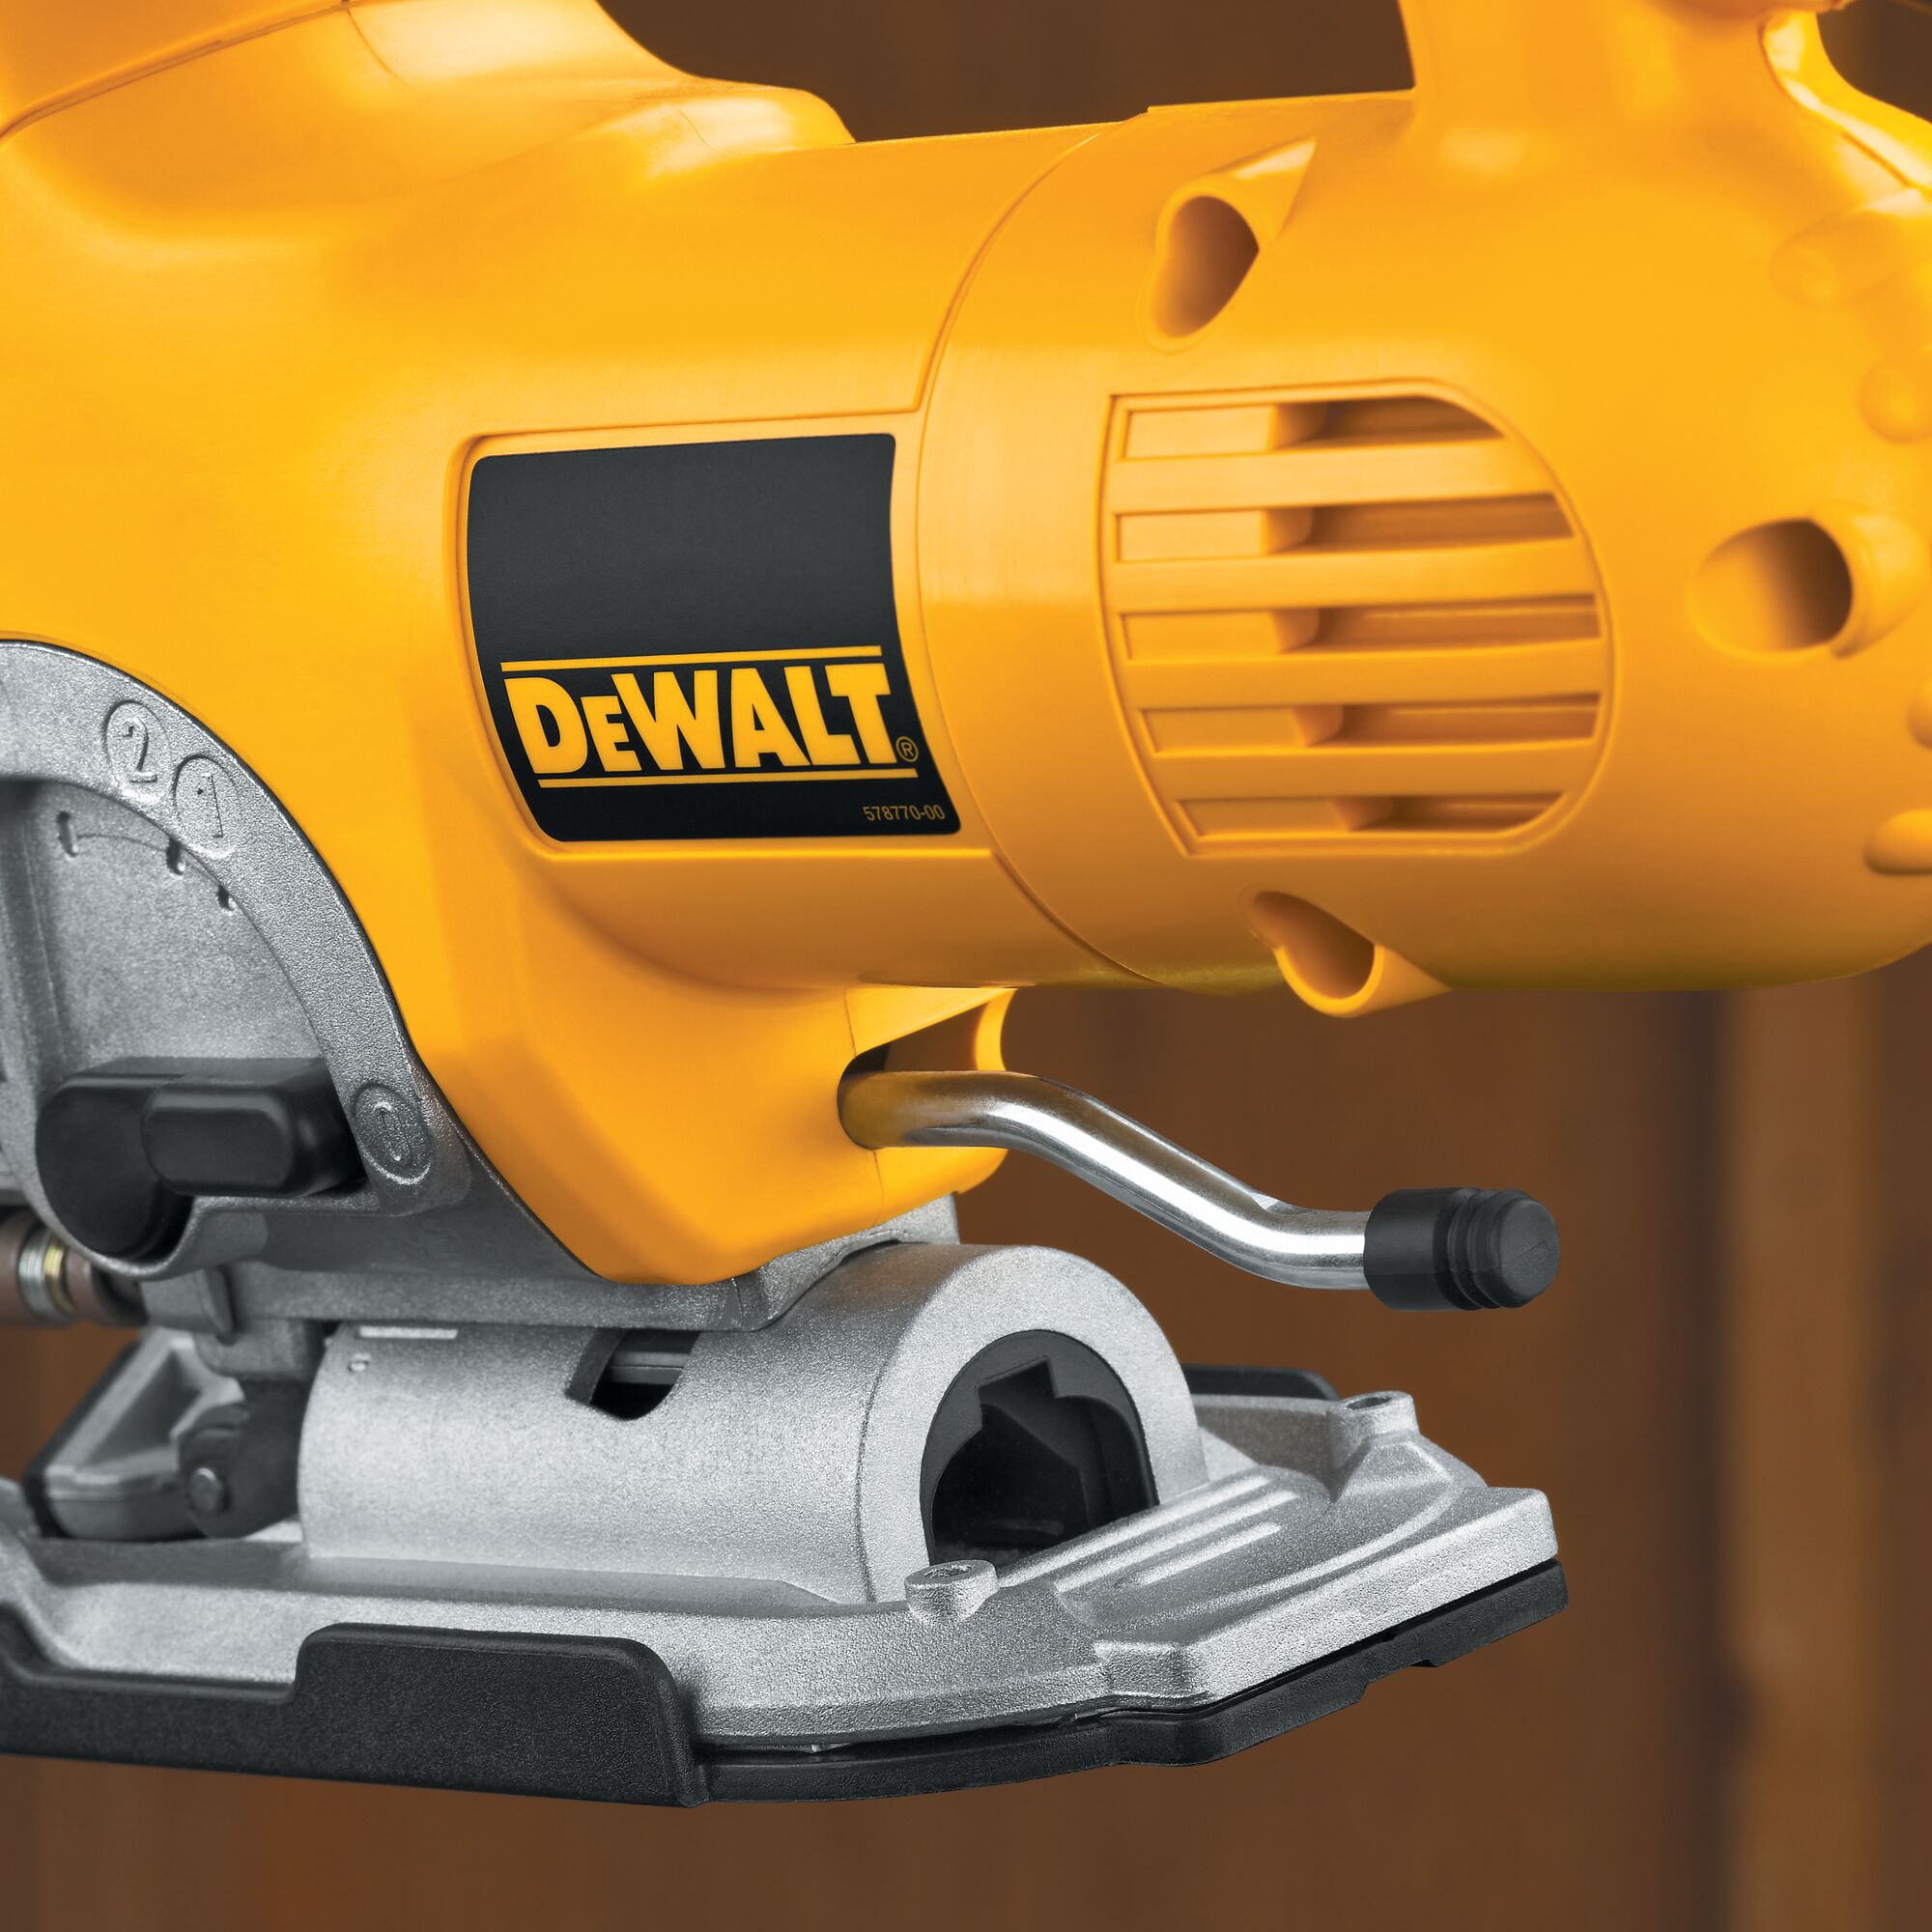 DeWalt DW331 Reconditioned Variable Speed Corded 110 Volt 701W T-Shank Jigsaw 